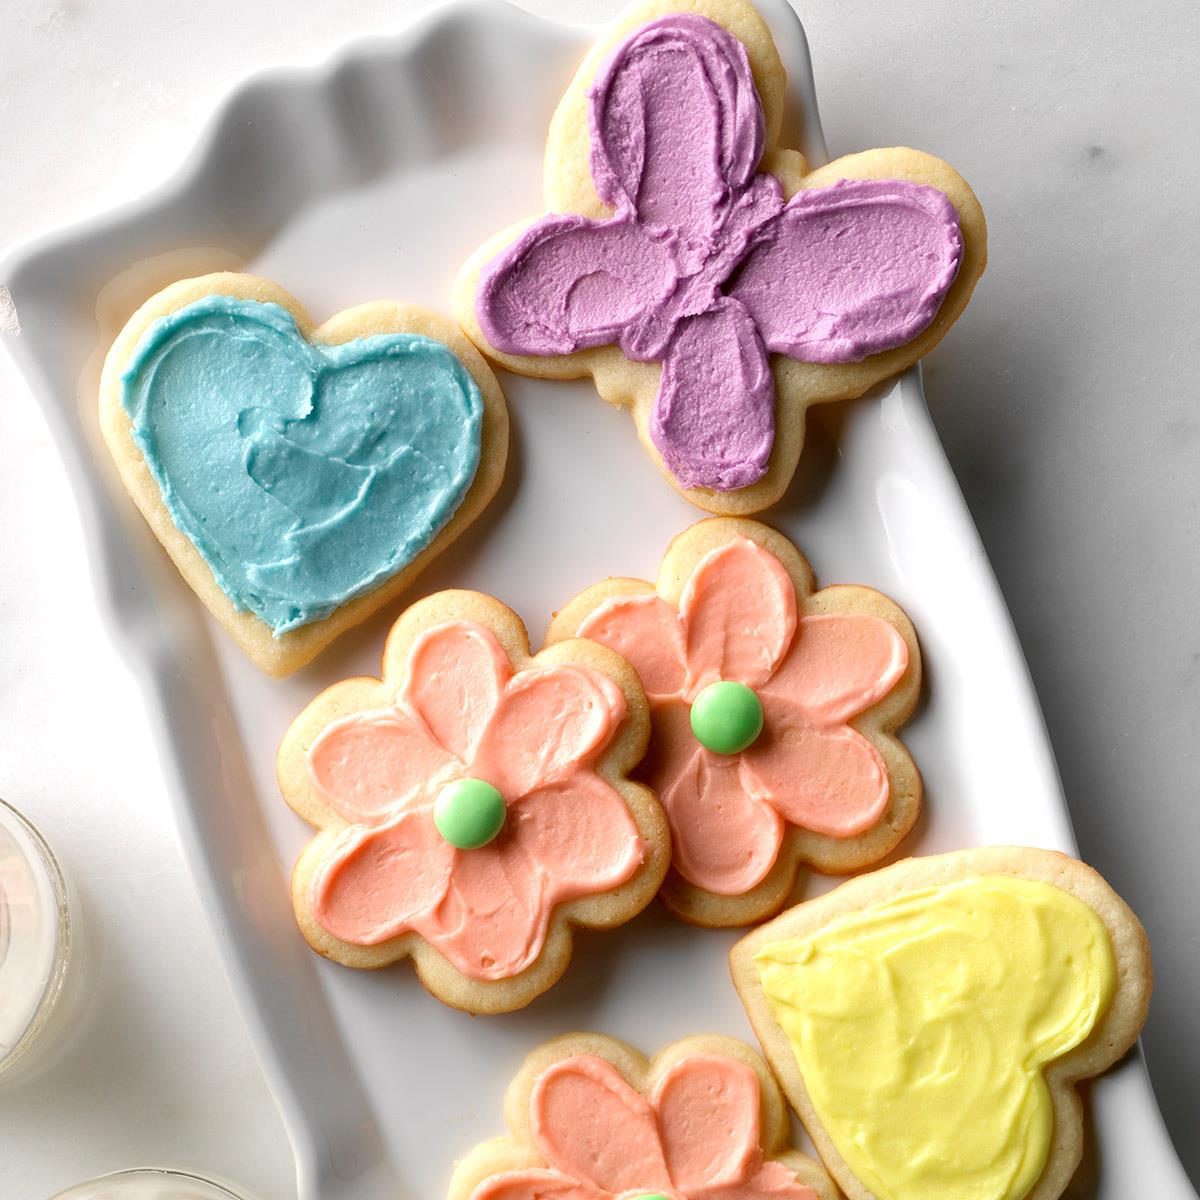 TOP 10 COOKIE DECORATING TOOLS, MIX MAKERY